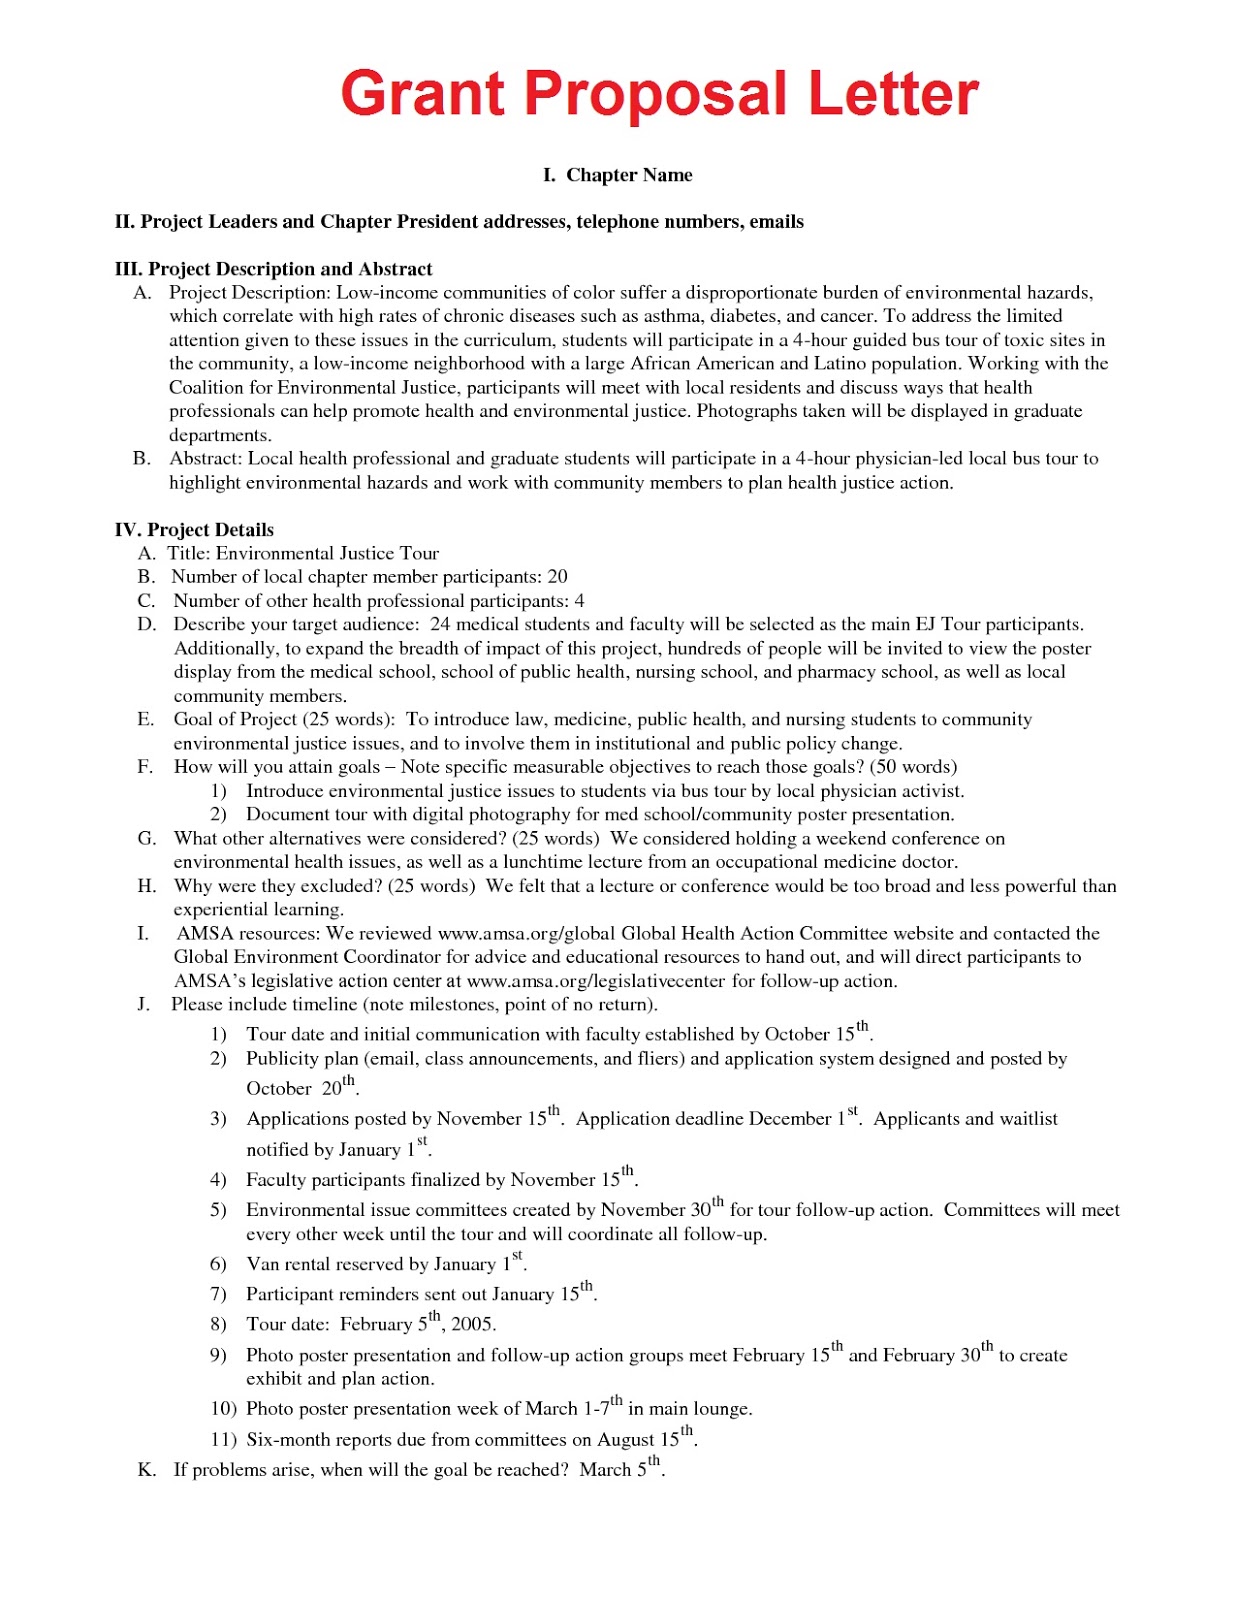 Grant Application: How to Write a Grant Cover Letter